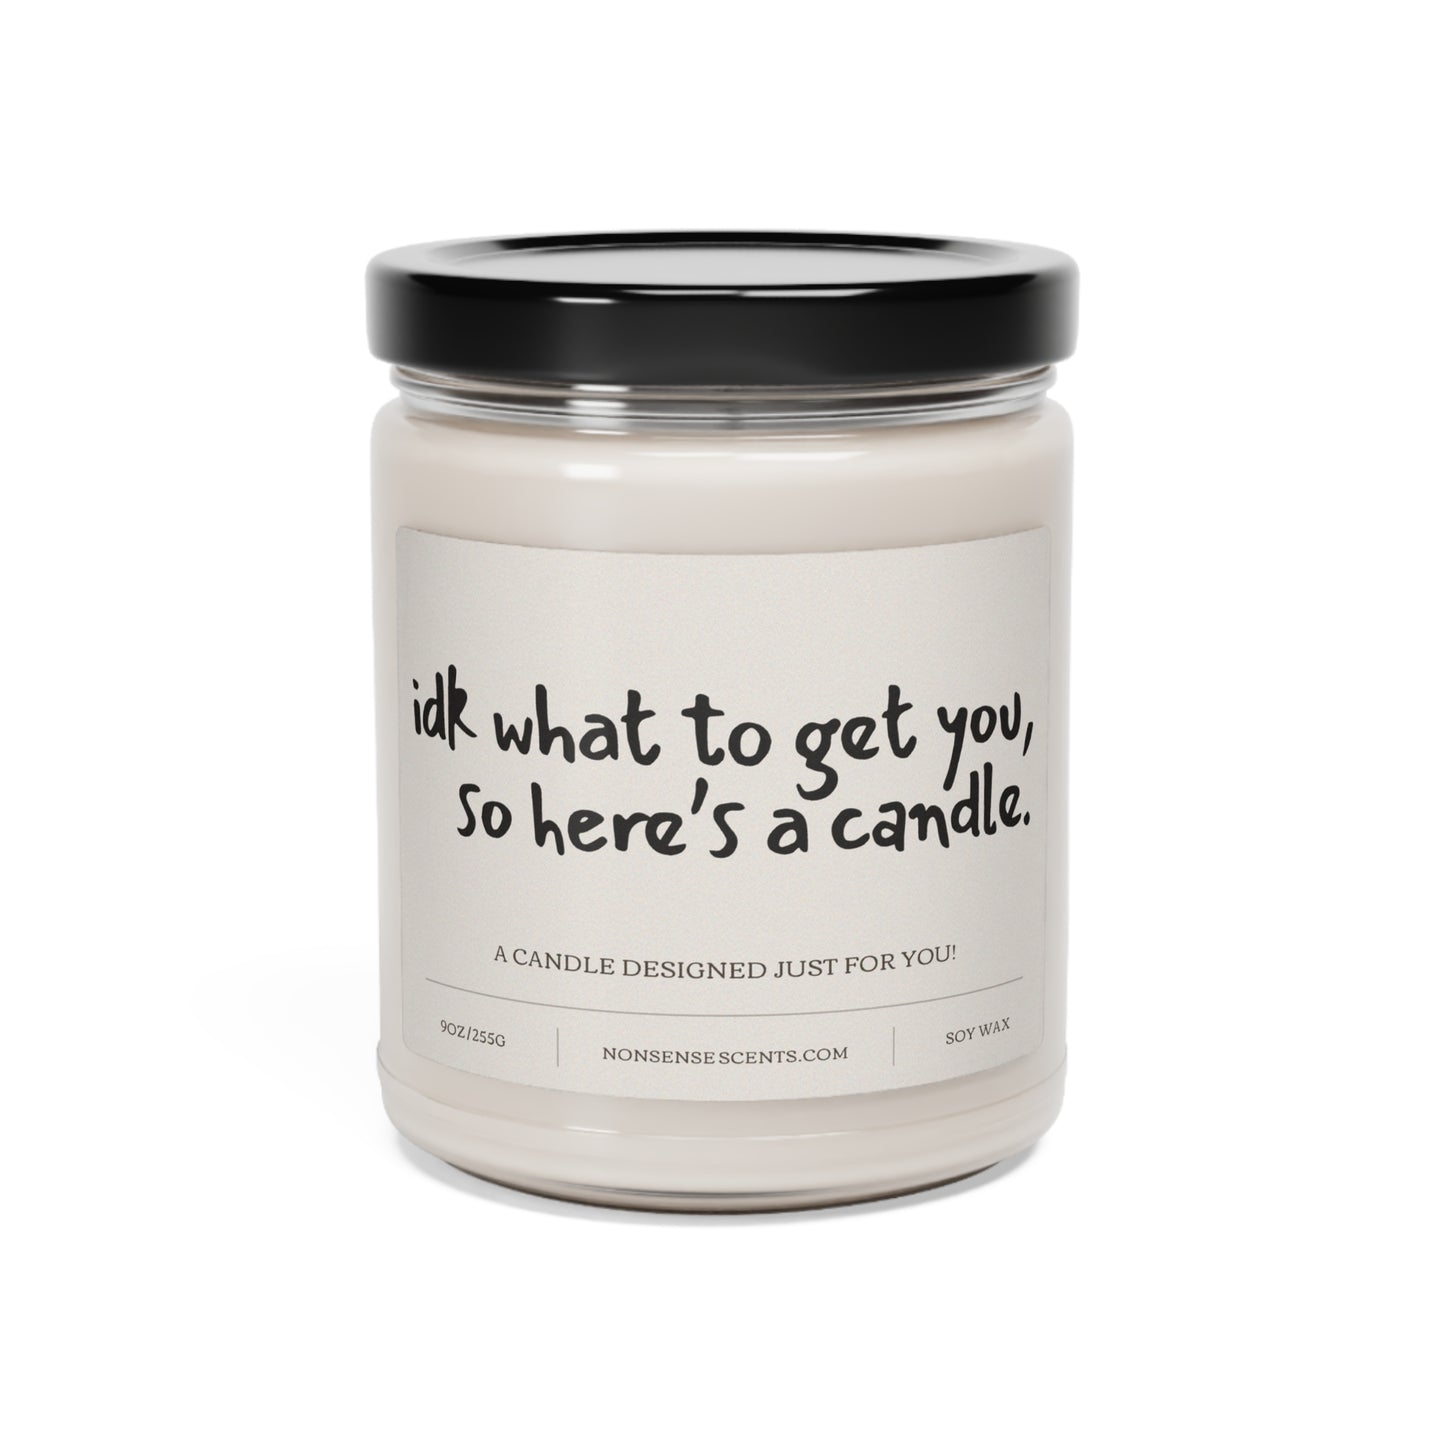 "Idk What To Get You, So Here's A Candle" Scented Candle